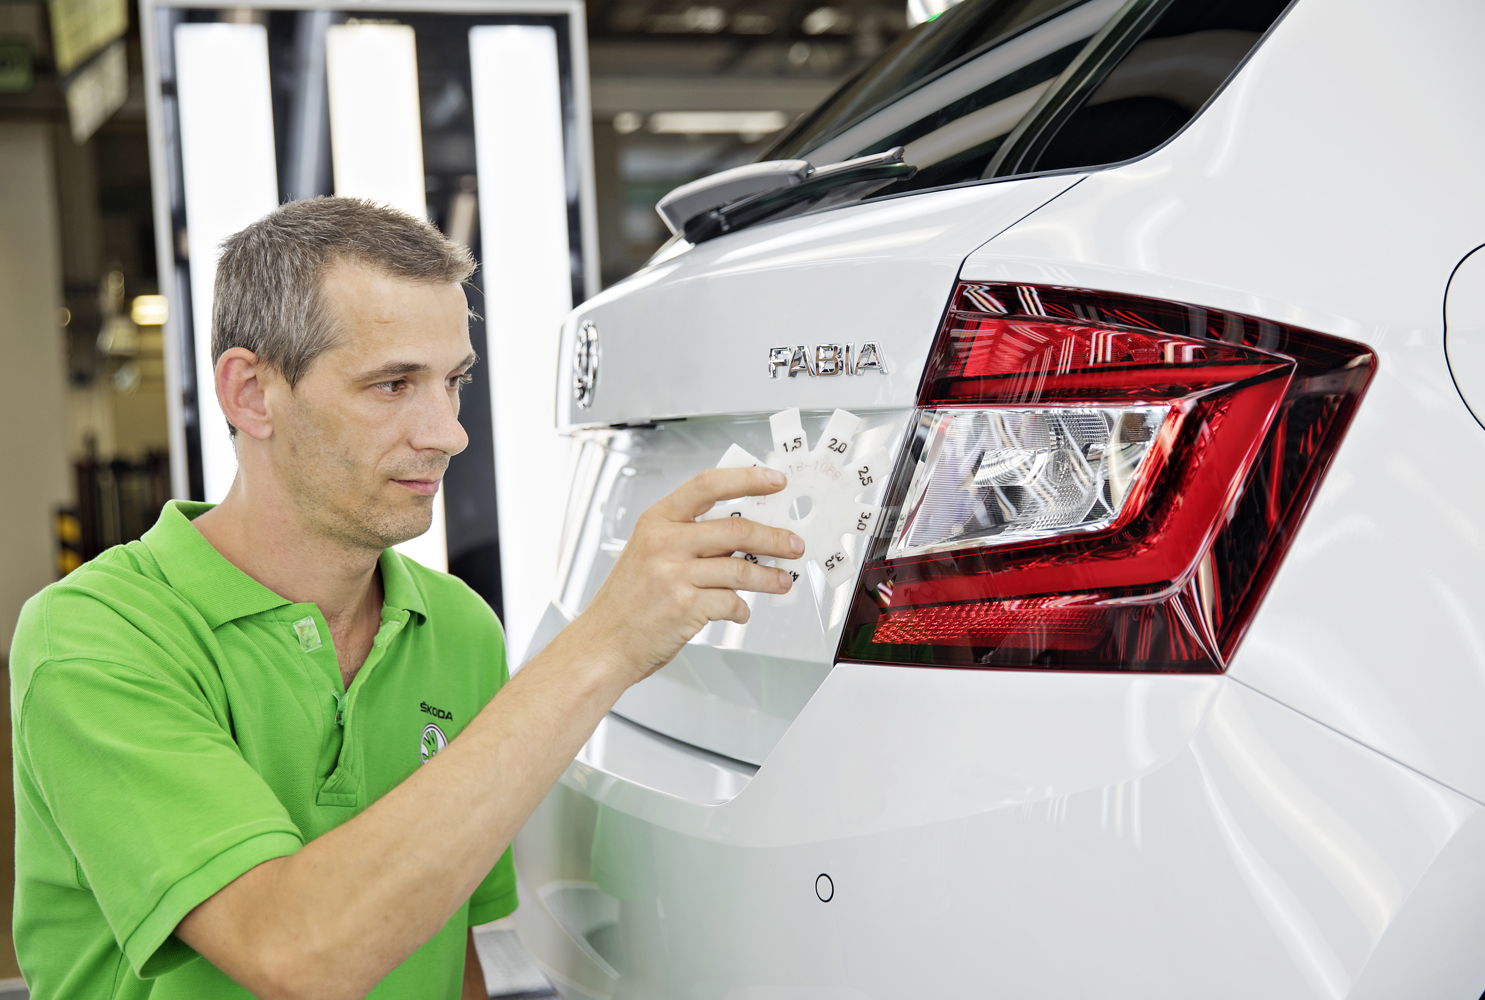 The millionth vehicle manufactured in this production year –
a ŠKODA FABIA 1.0 TSI in Moon White – rolled off the line
at the Mladá Boleslav plant on 17 October.